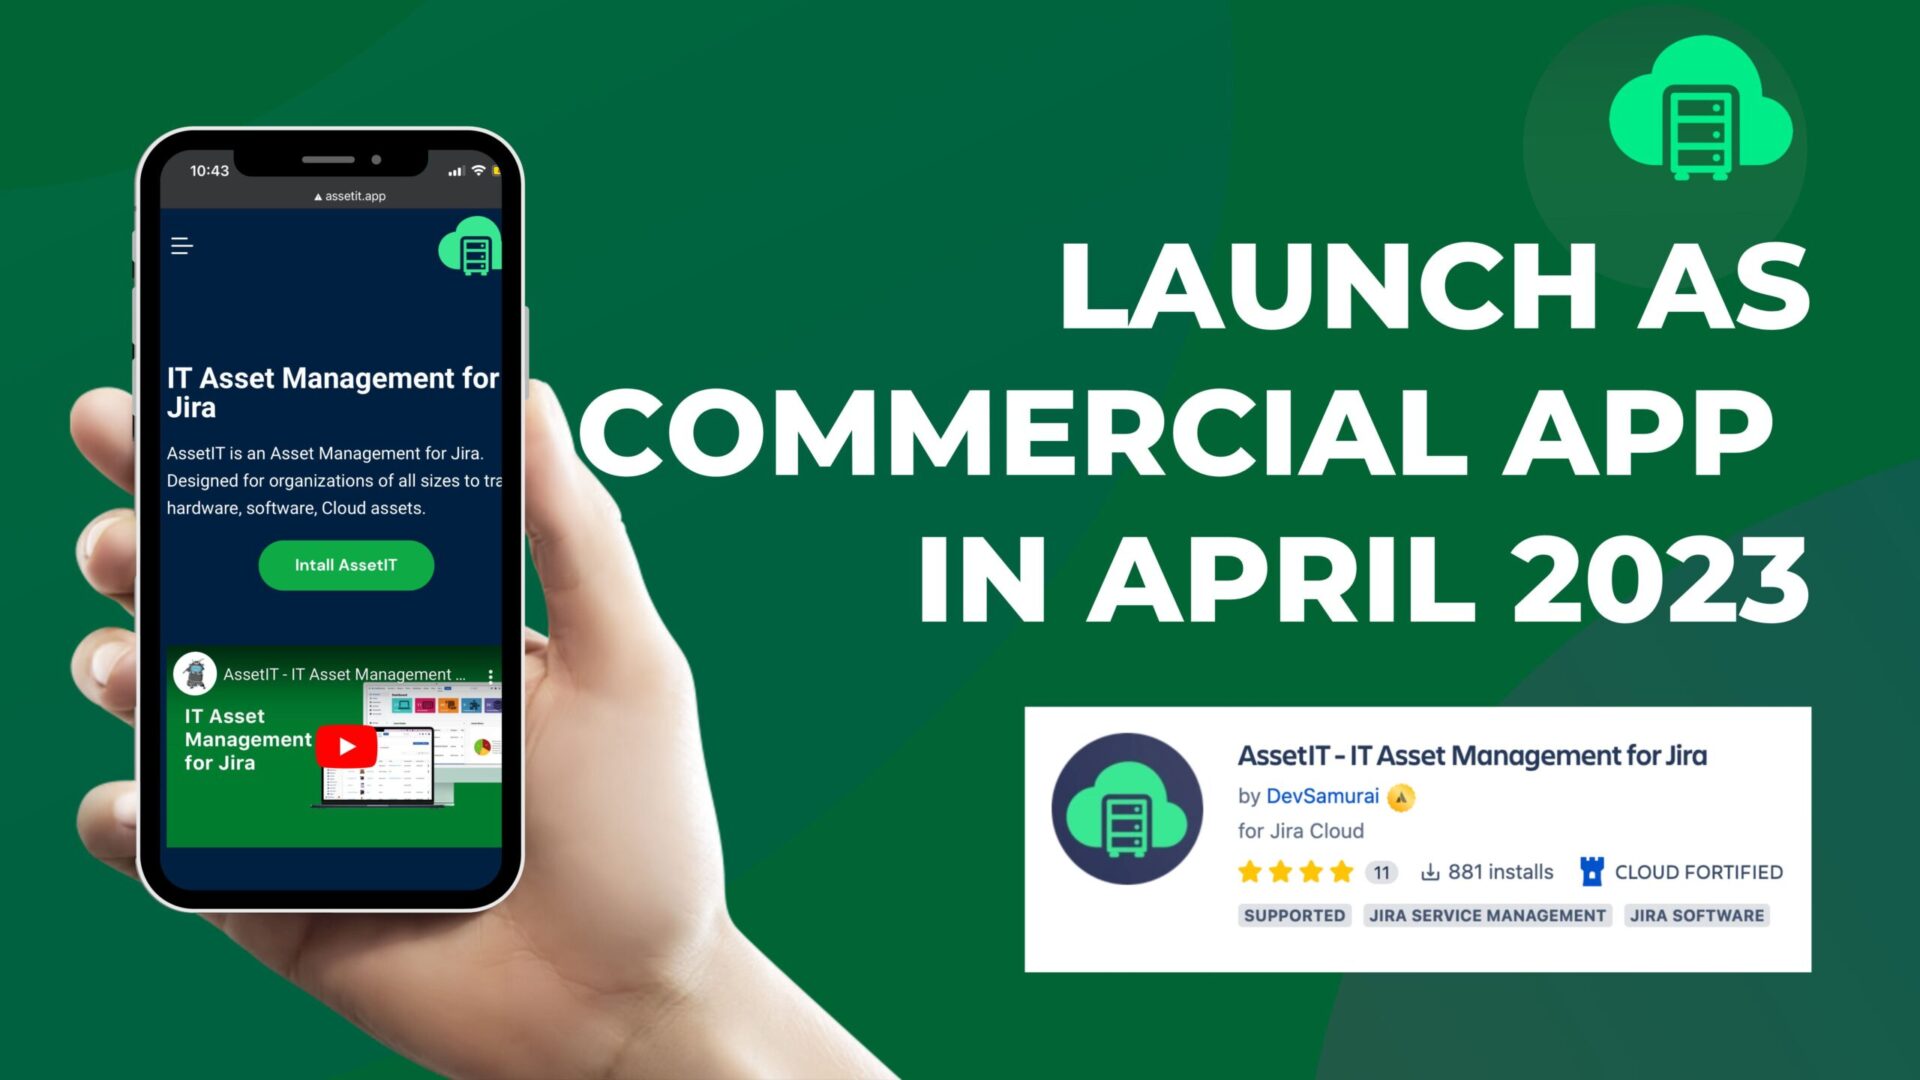 Launch-as-Commercial-App-in-April-2023-scaled